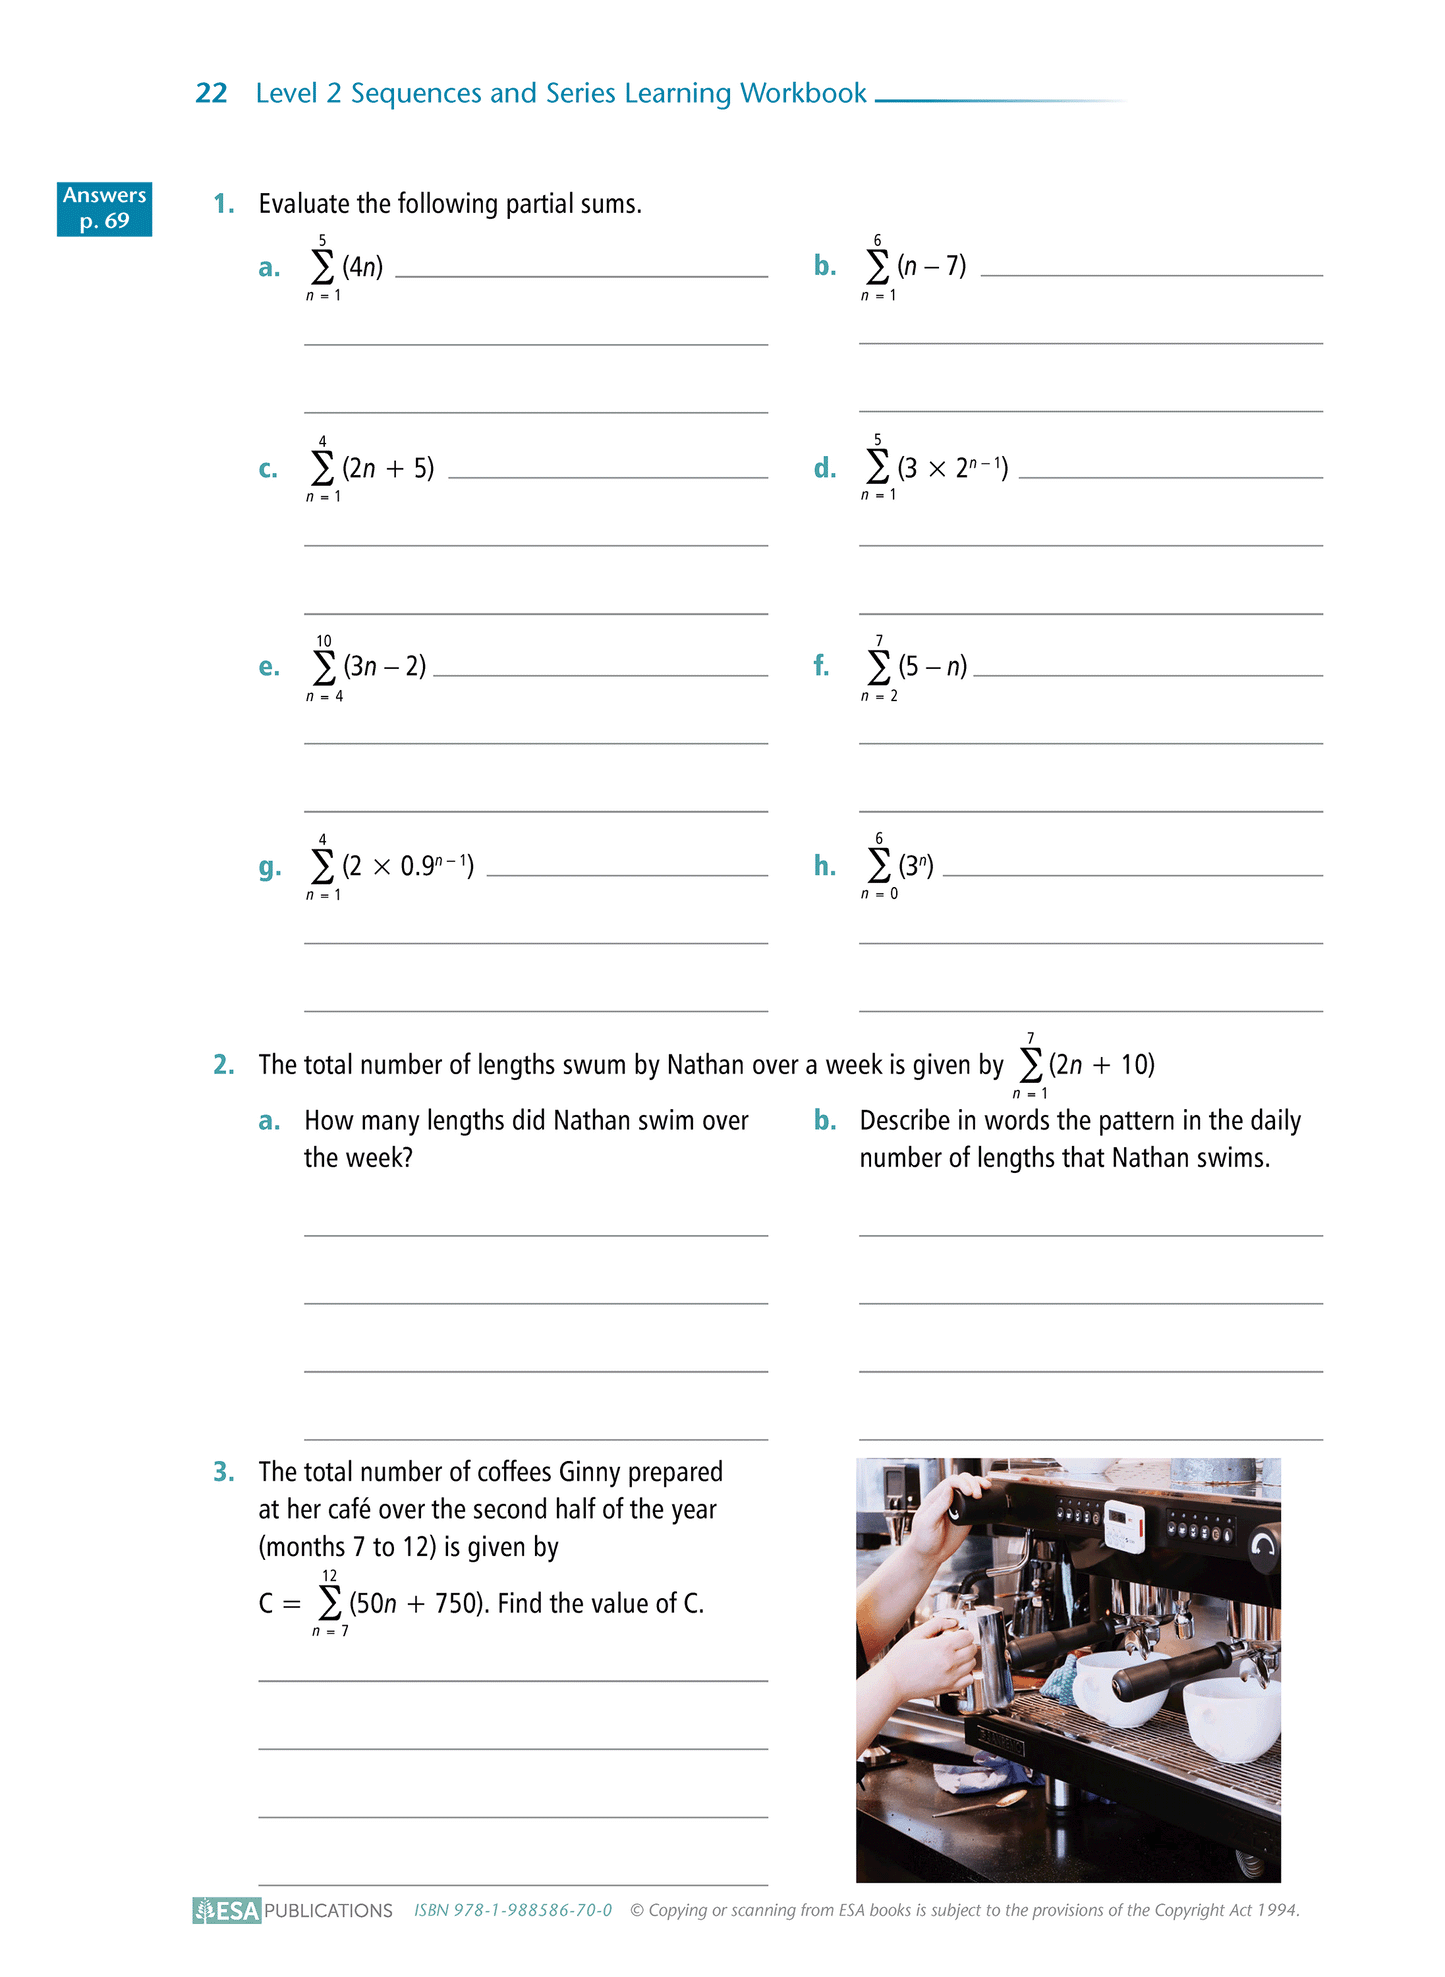 Level 2 Sequences and Series 2.3 Learning Workbook - SPECIAL (damaged stock at $5 each)